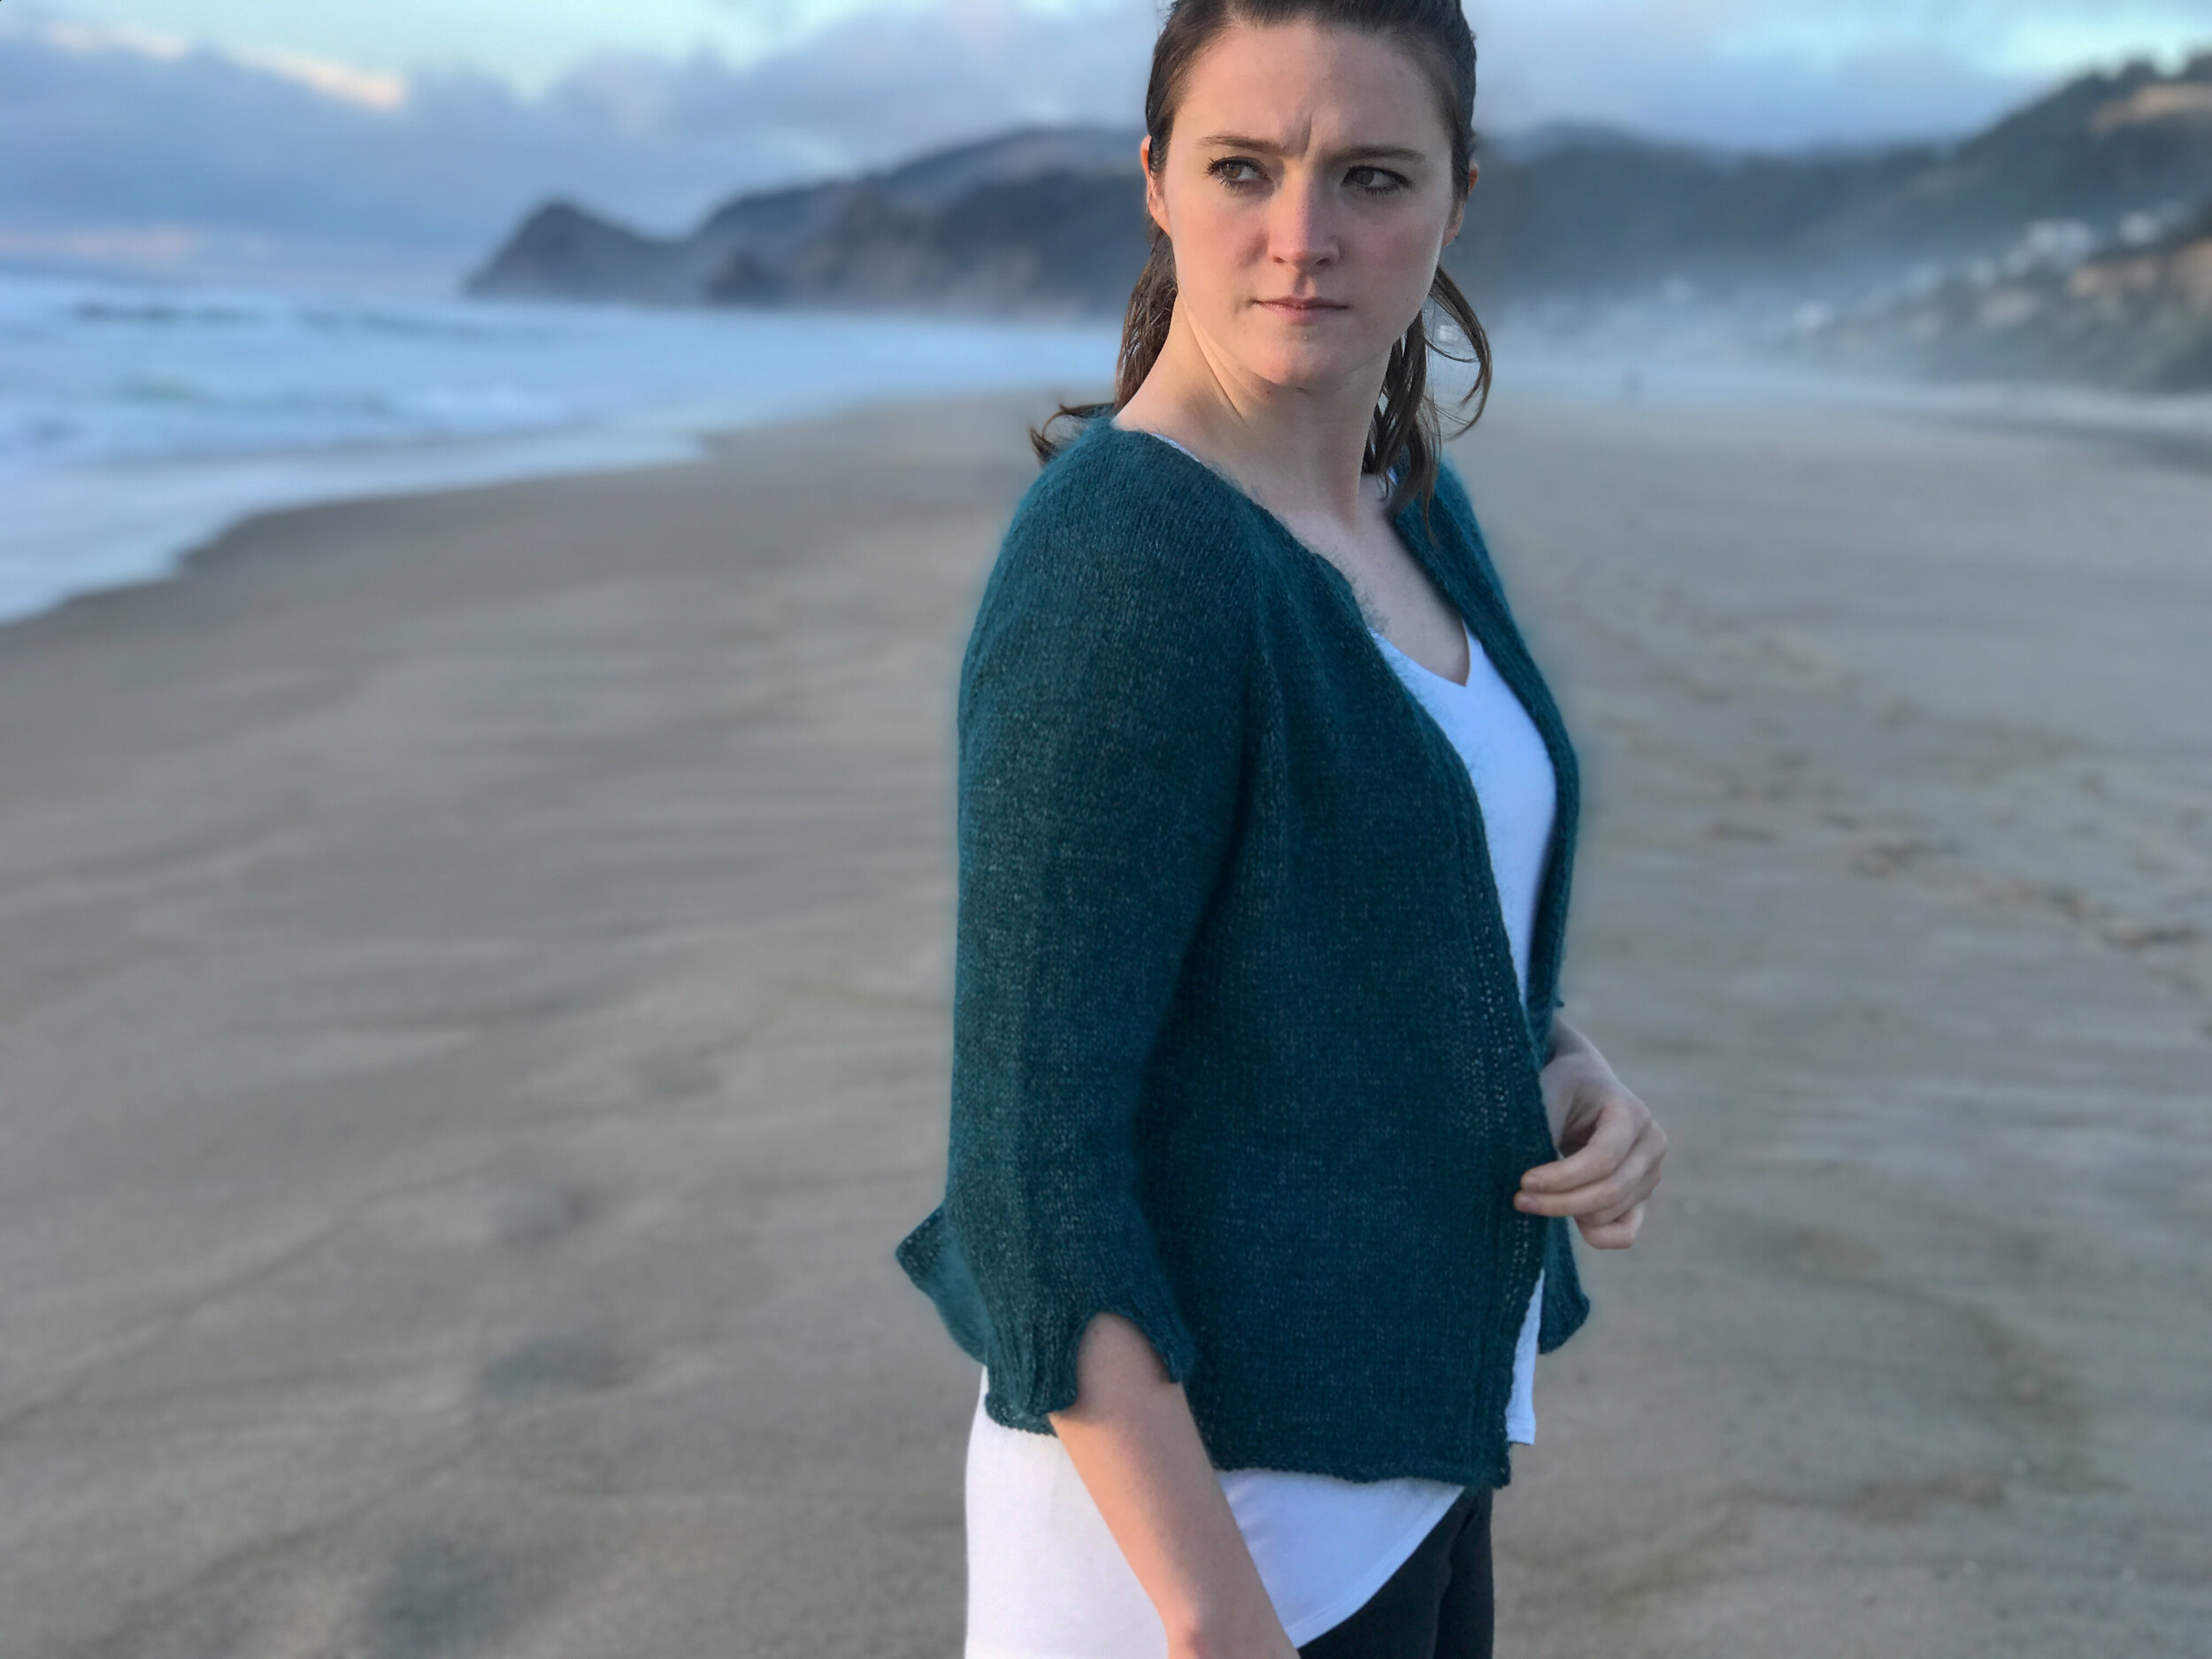 Cove Palisades Knit Cardigan Pattern — Knit for the Soul by Kay Hopkins